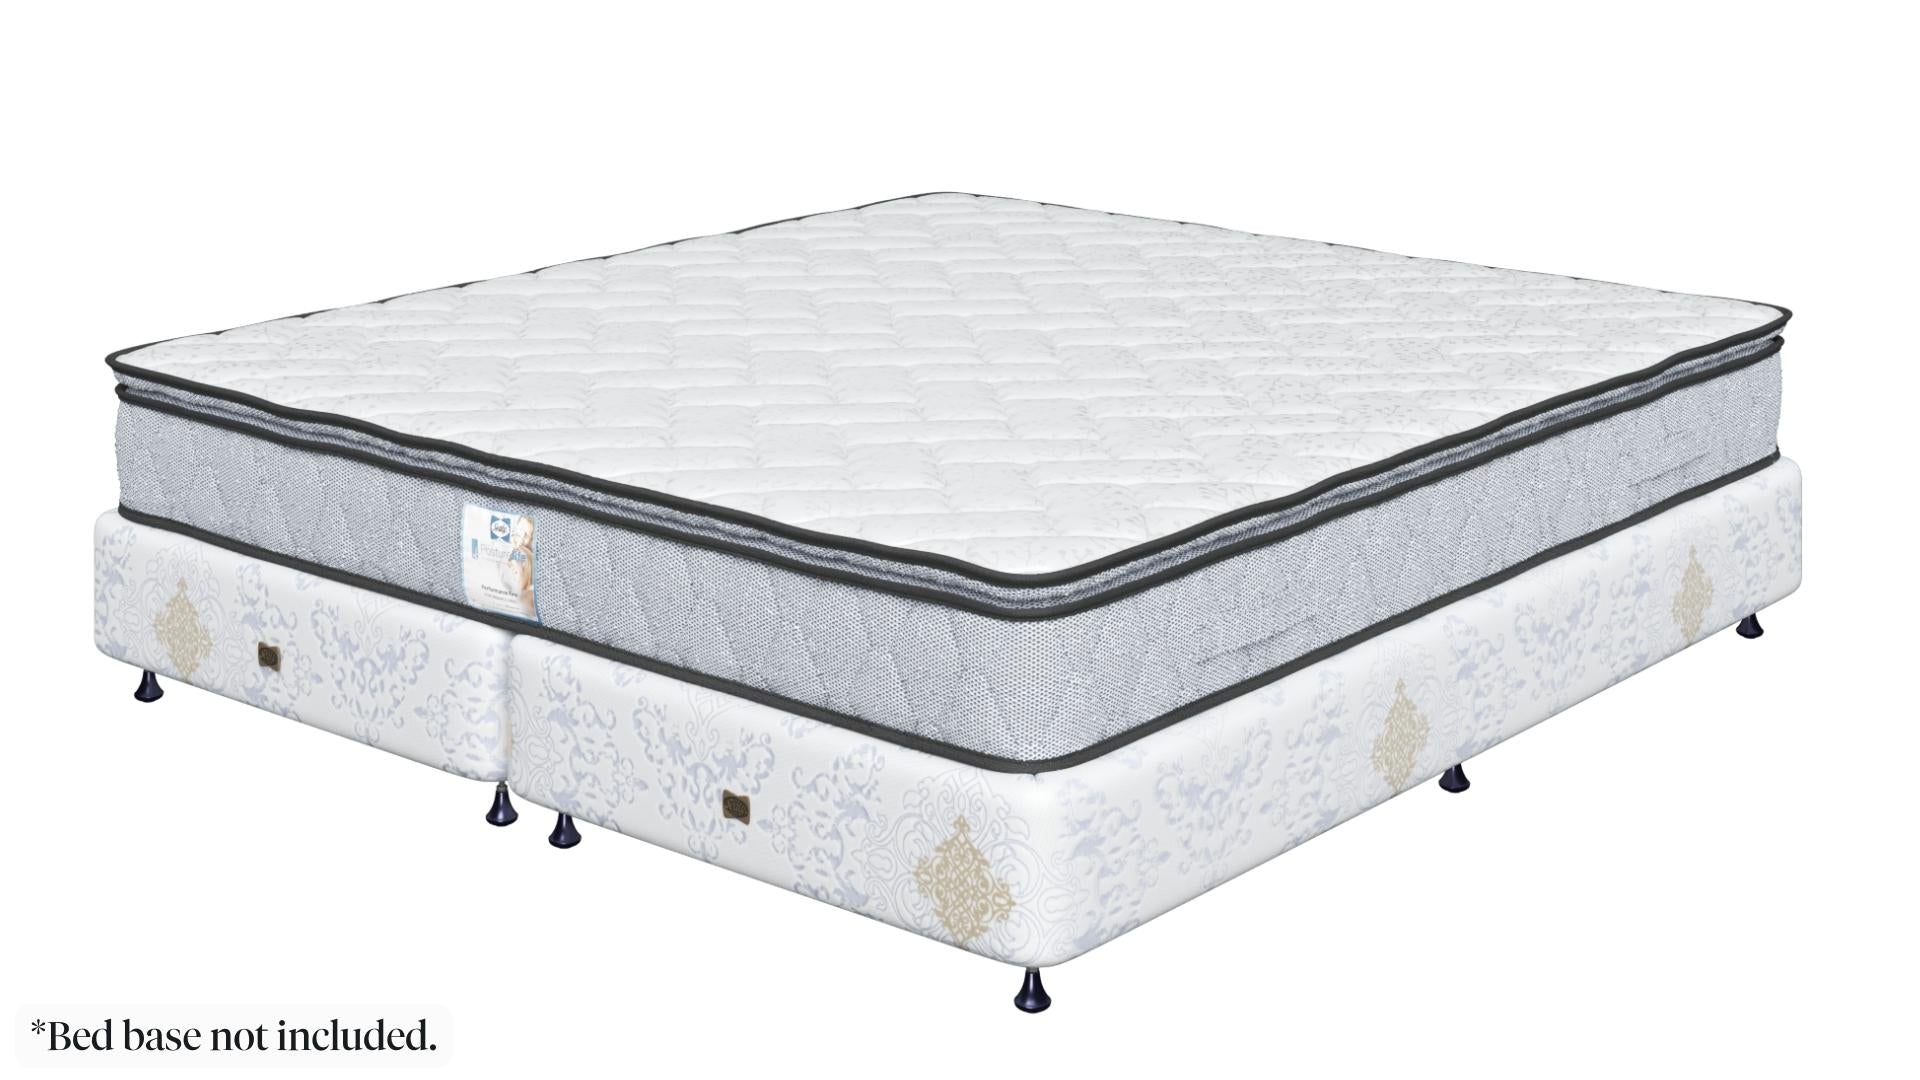 Sealy Posture Life Perfect Rest Mattress